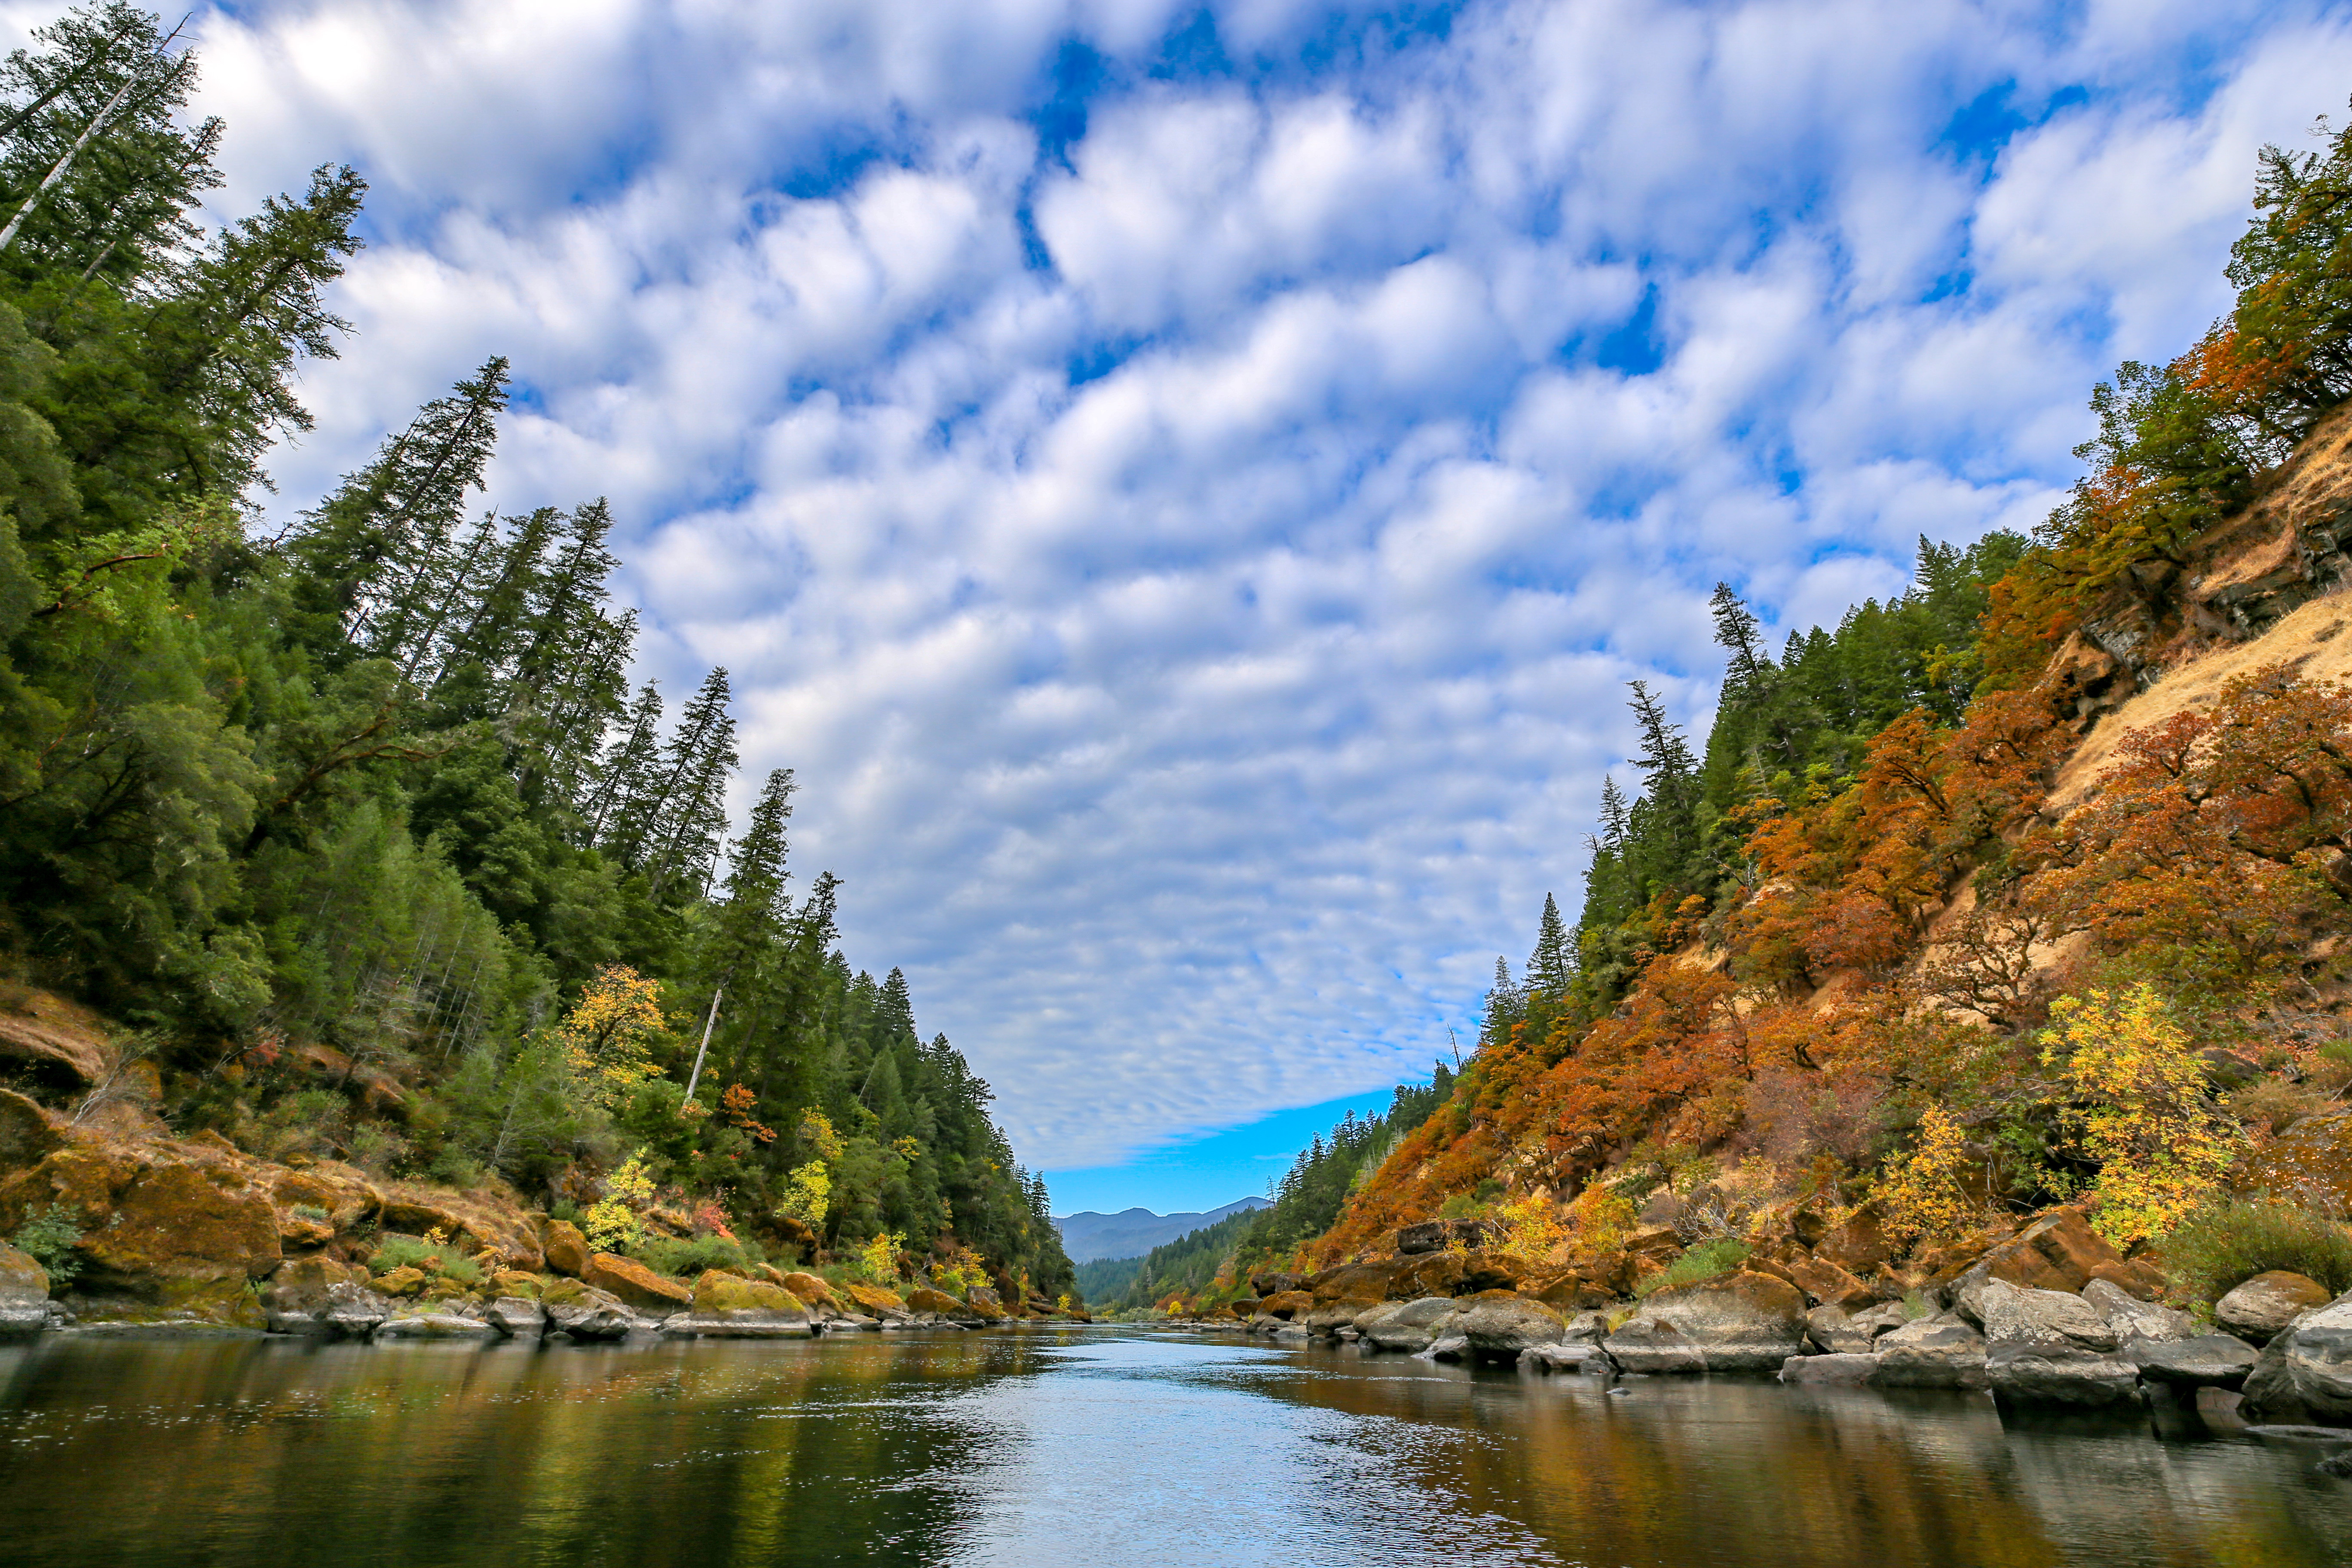 The Rogue Wild and Scenic River in Oregon